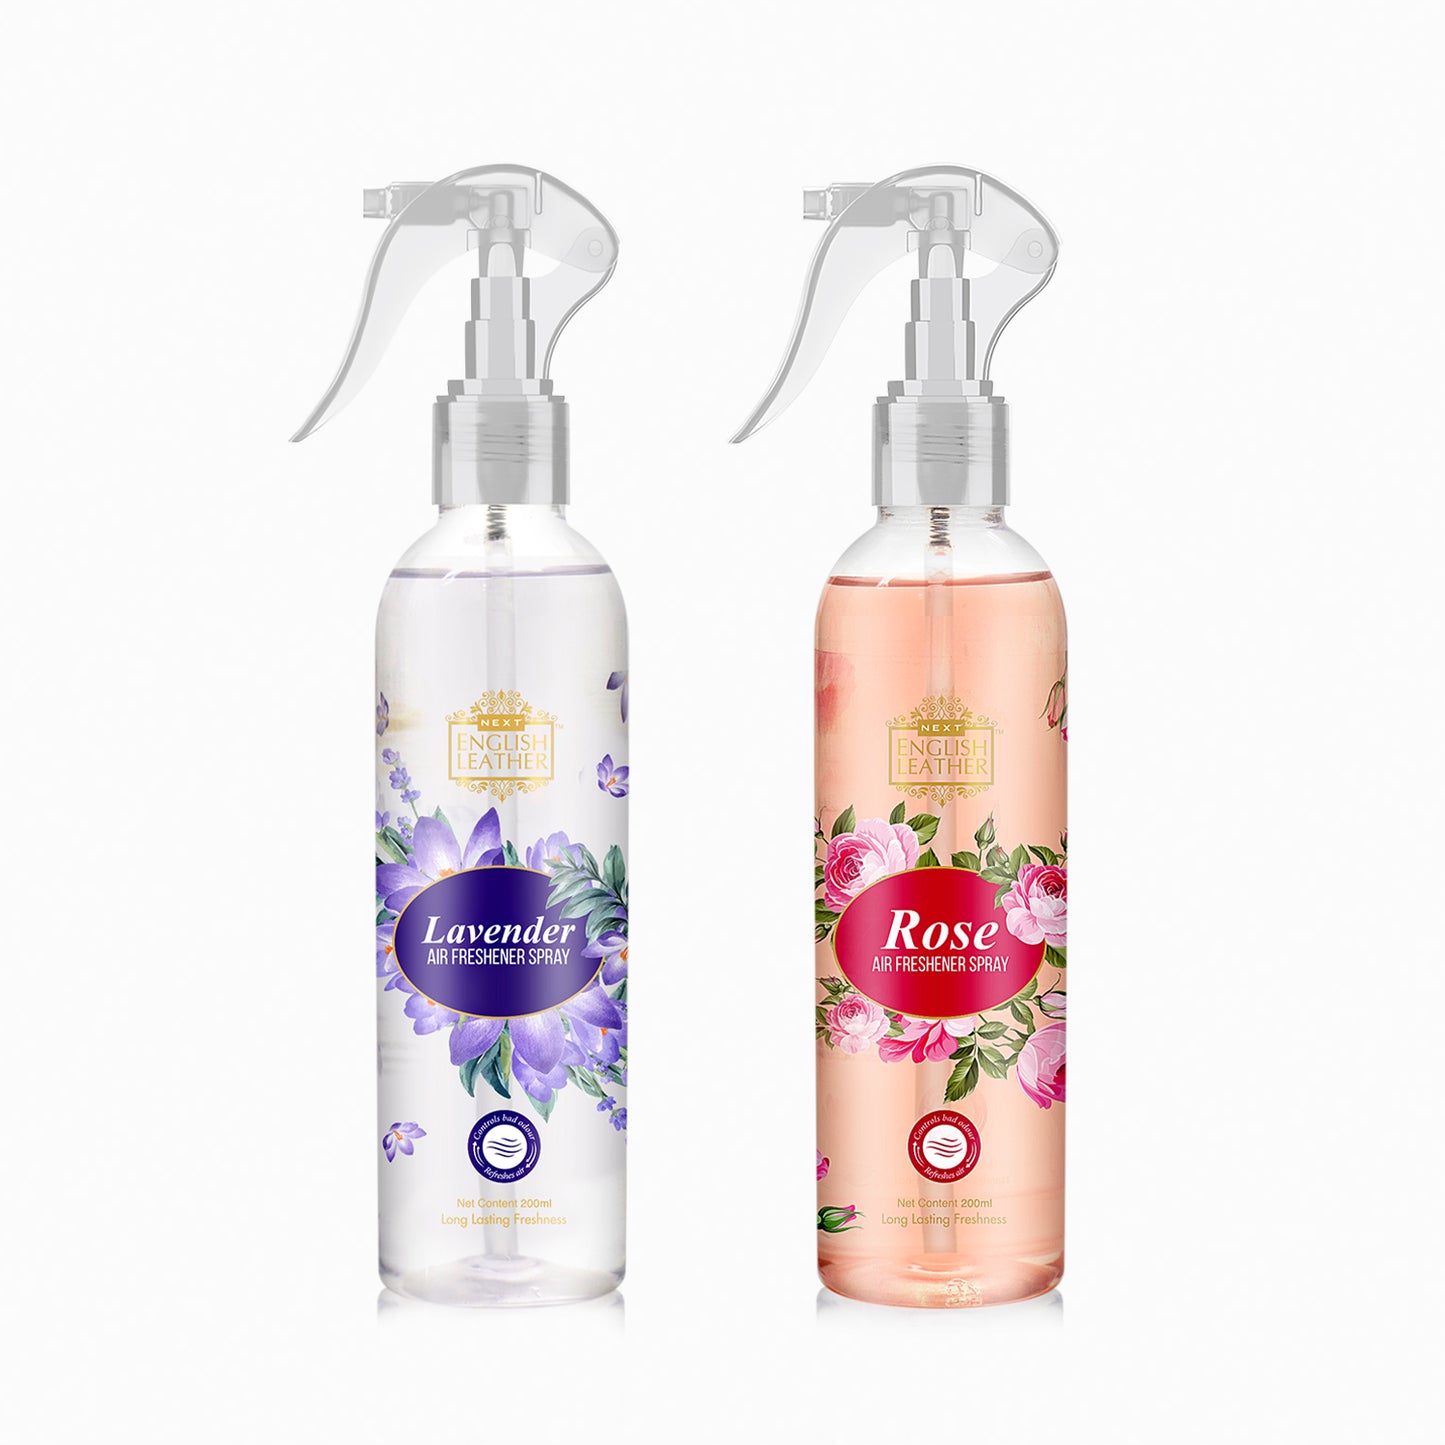 Next English Leather Lavender  and Rose  Combo No Gas Room Air Freshener Spray - 200ml Each